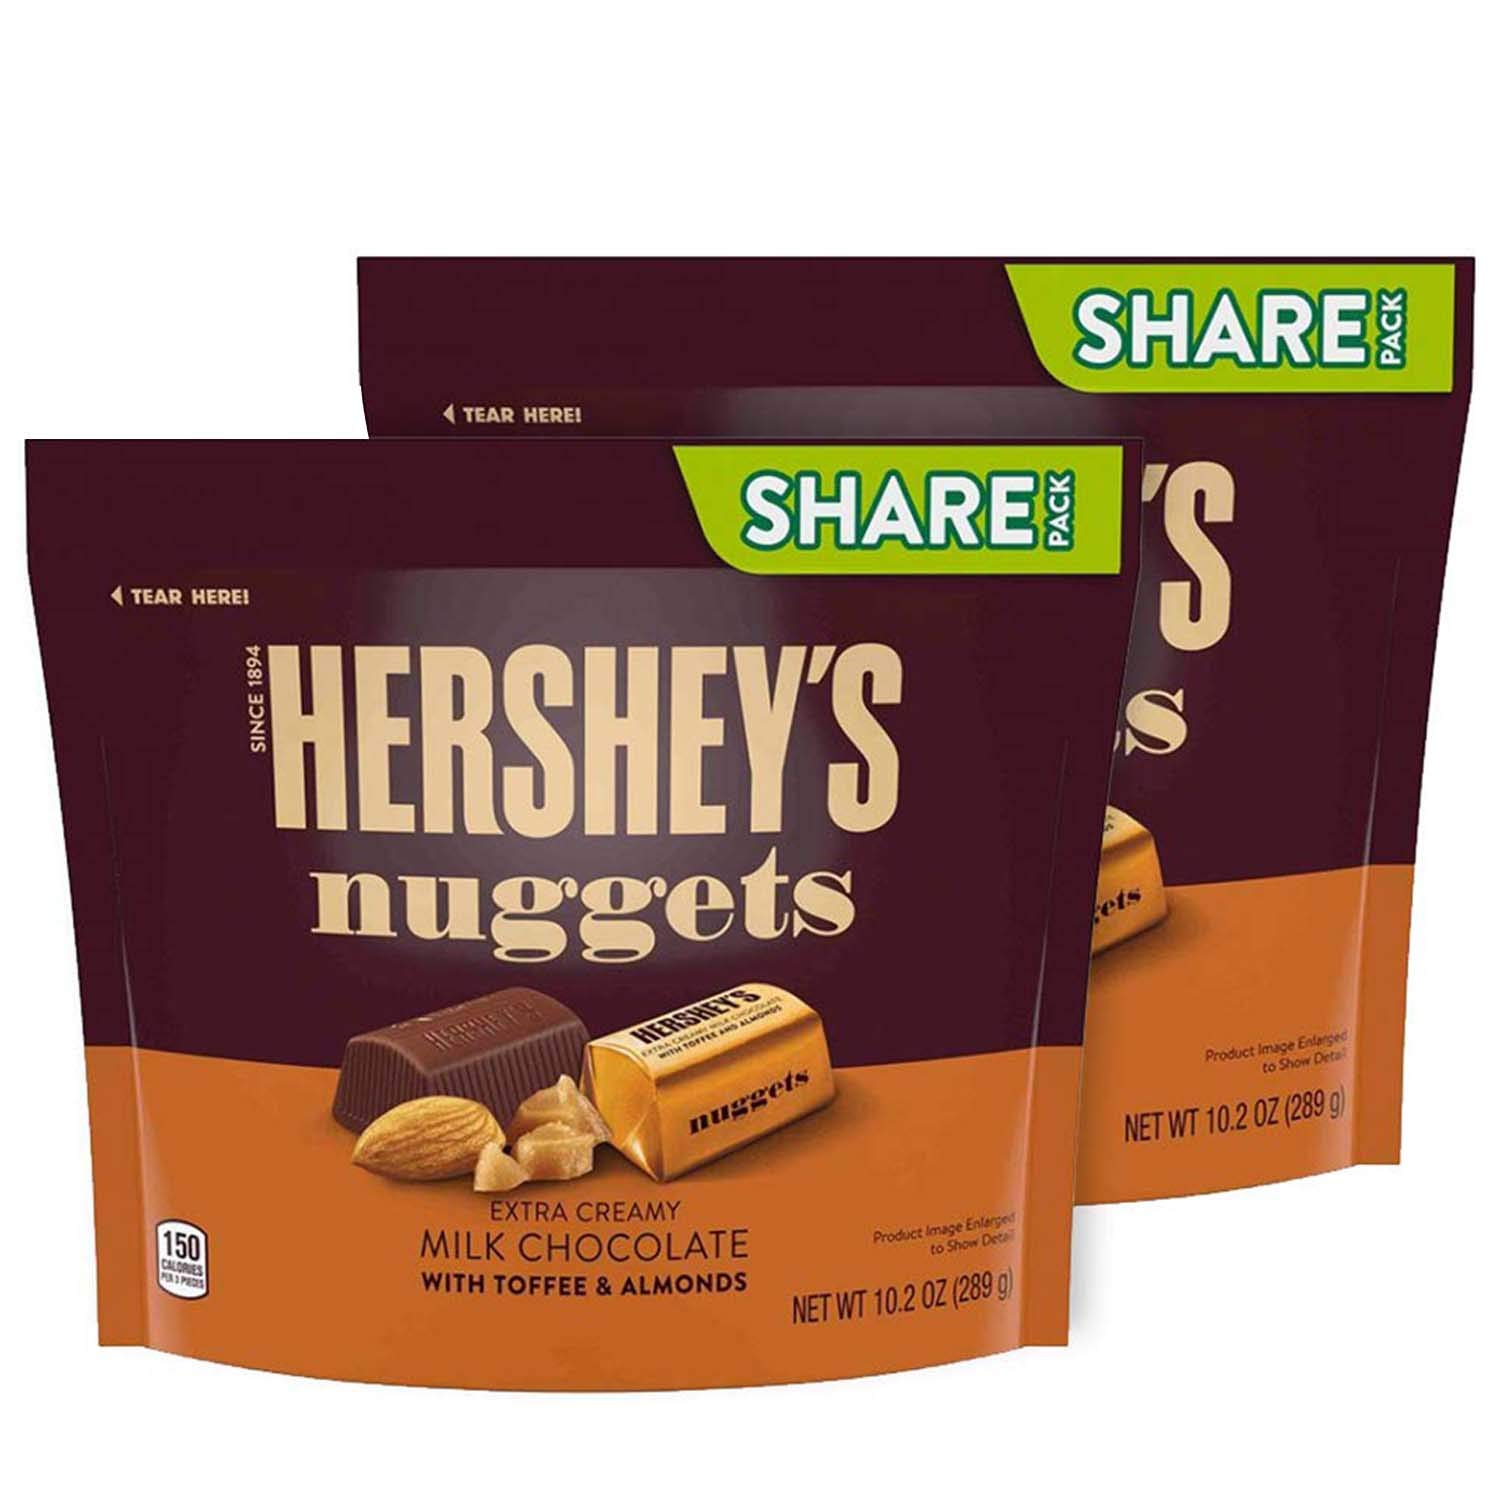 Hershey's Nuggets Milk Chocolate With Toffee & Almonds Image